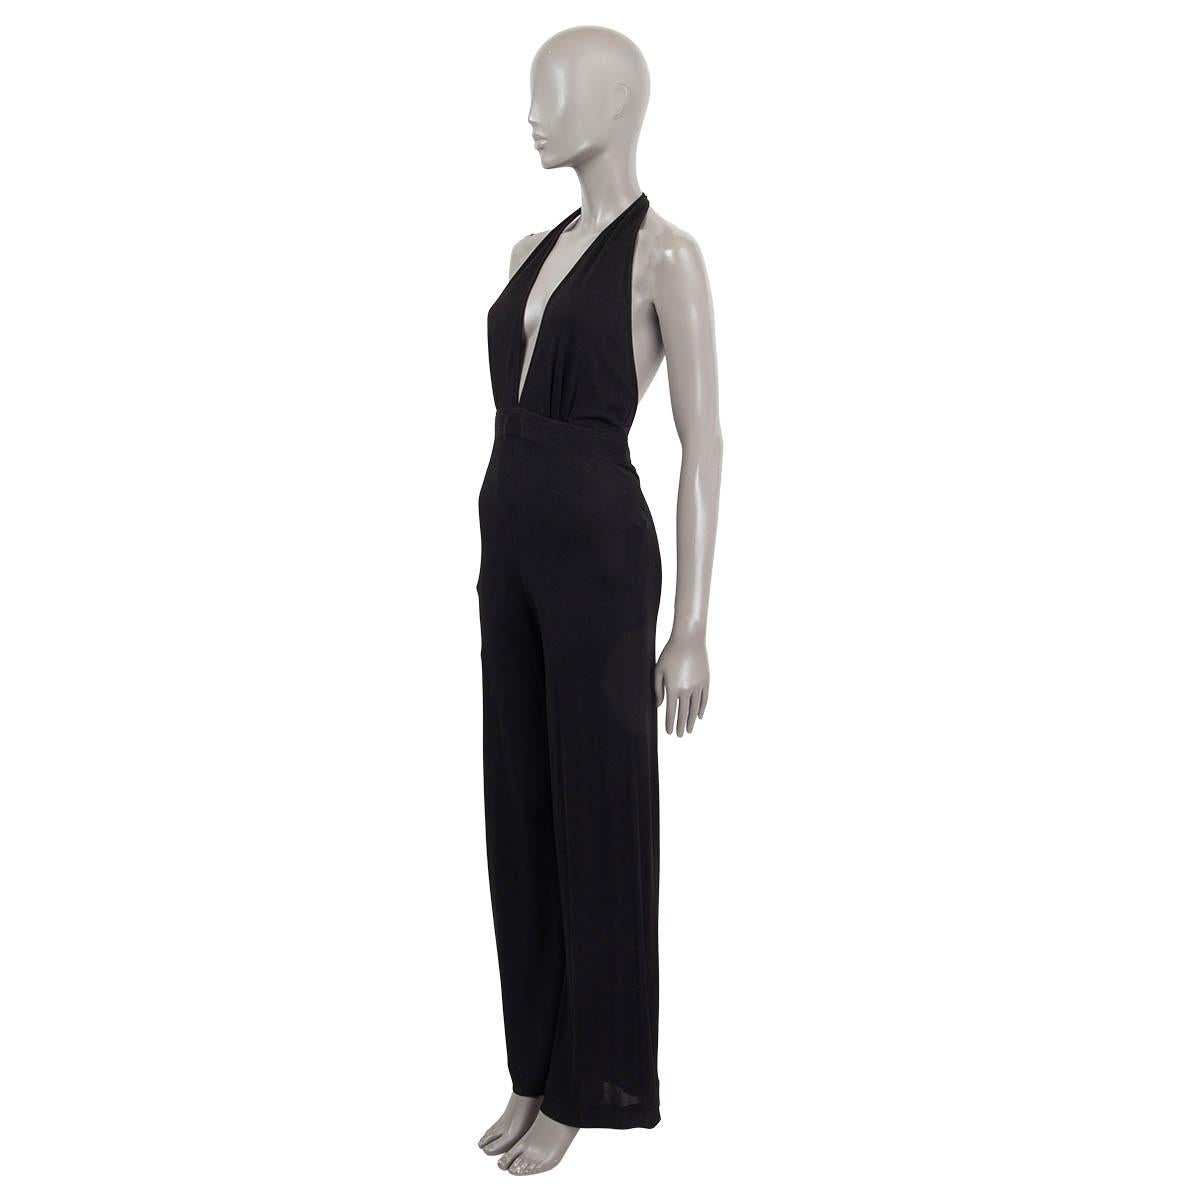 100% authentic Hermès halter neck wide leg open back jumpsuit in black viscose (100%). Closes with a concealed zipper and one hook in the back. Unlined. Has been worn and is excellent condition.

Measurements
Tag Size	36
Size	XS
Bust From	32cm